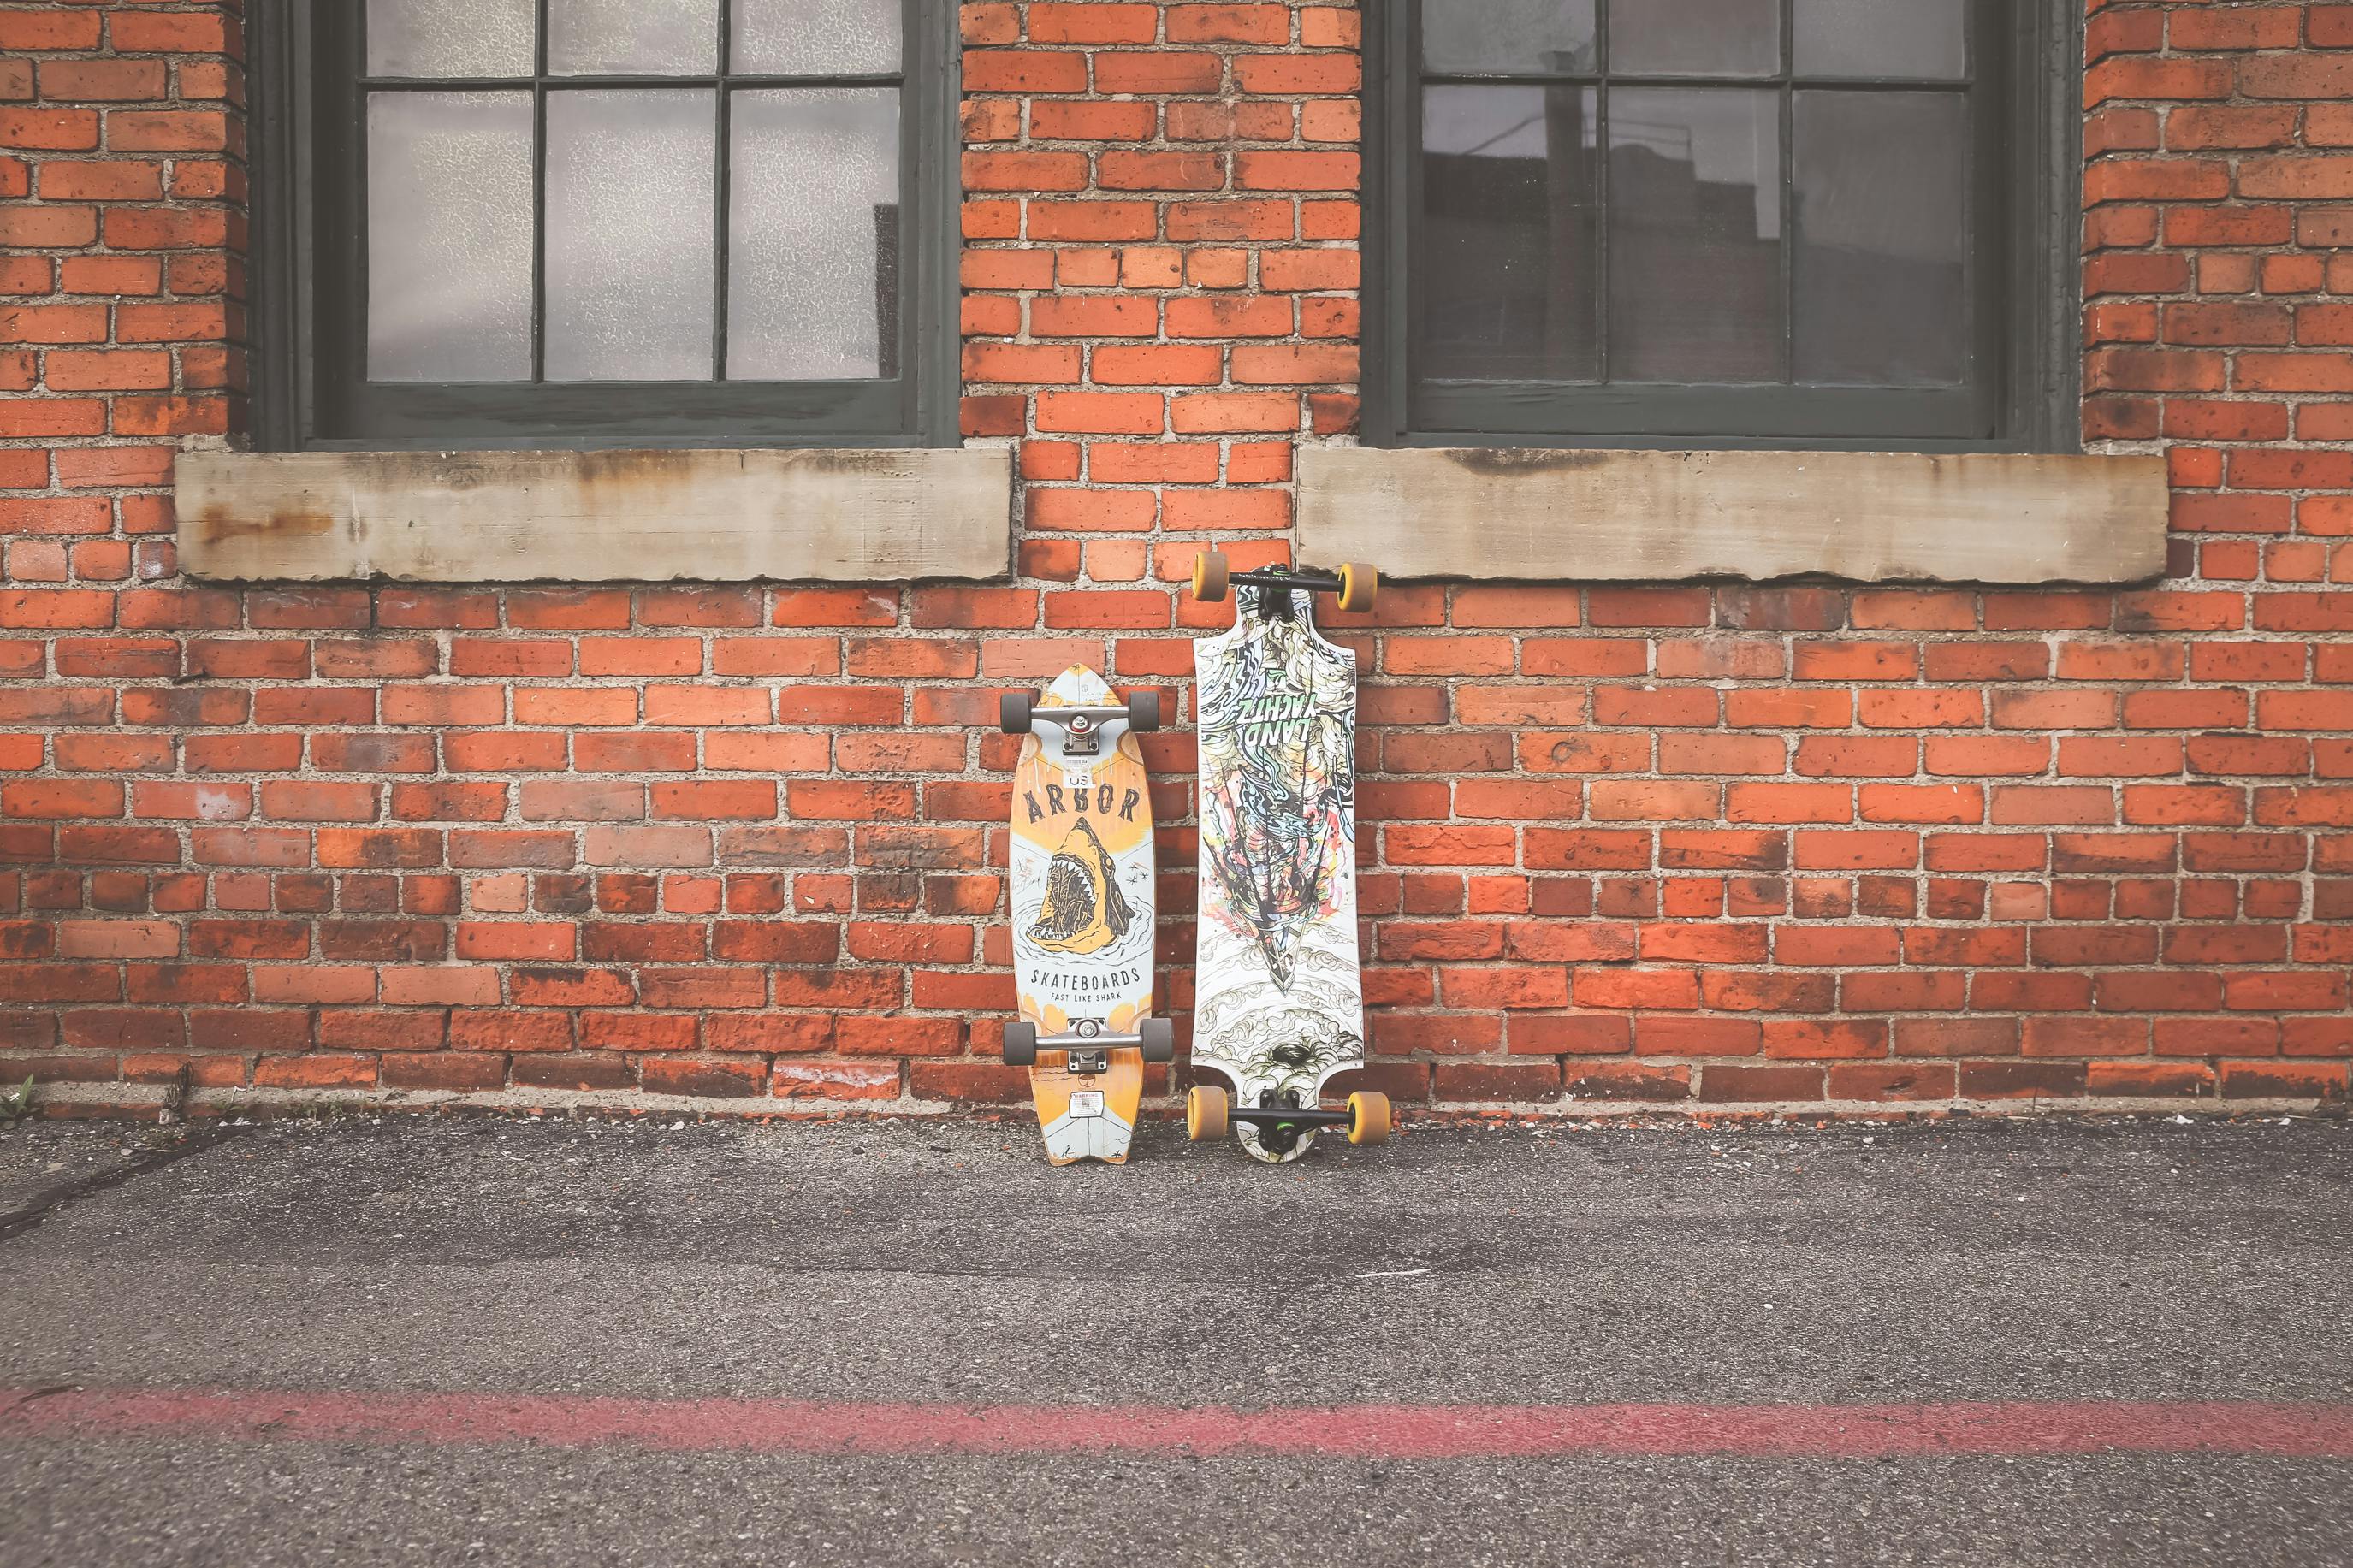 Get Ready to Shred with This Awesome Skate Wallpaper!